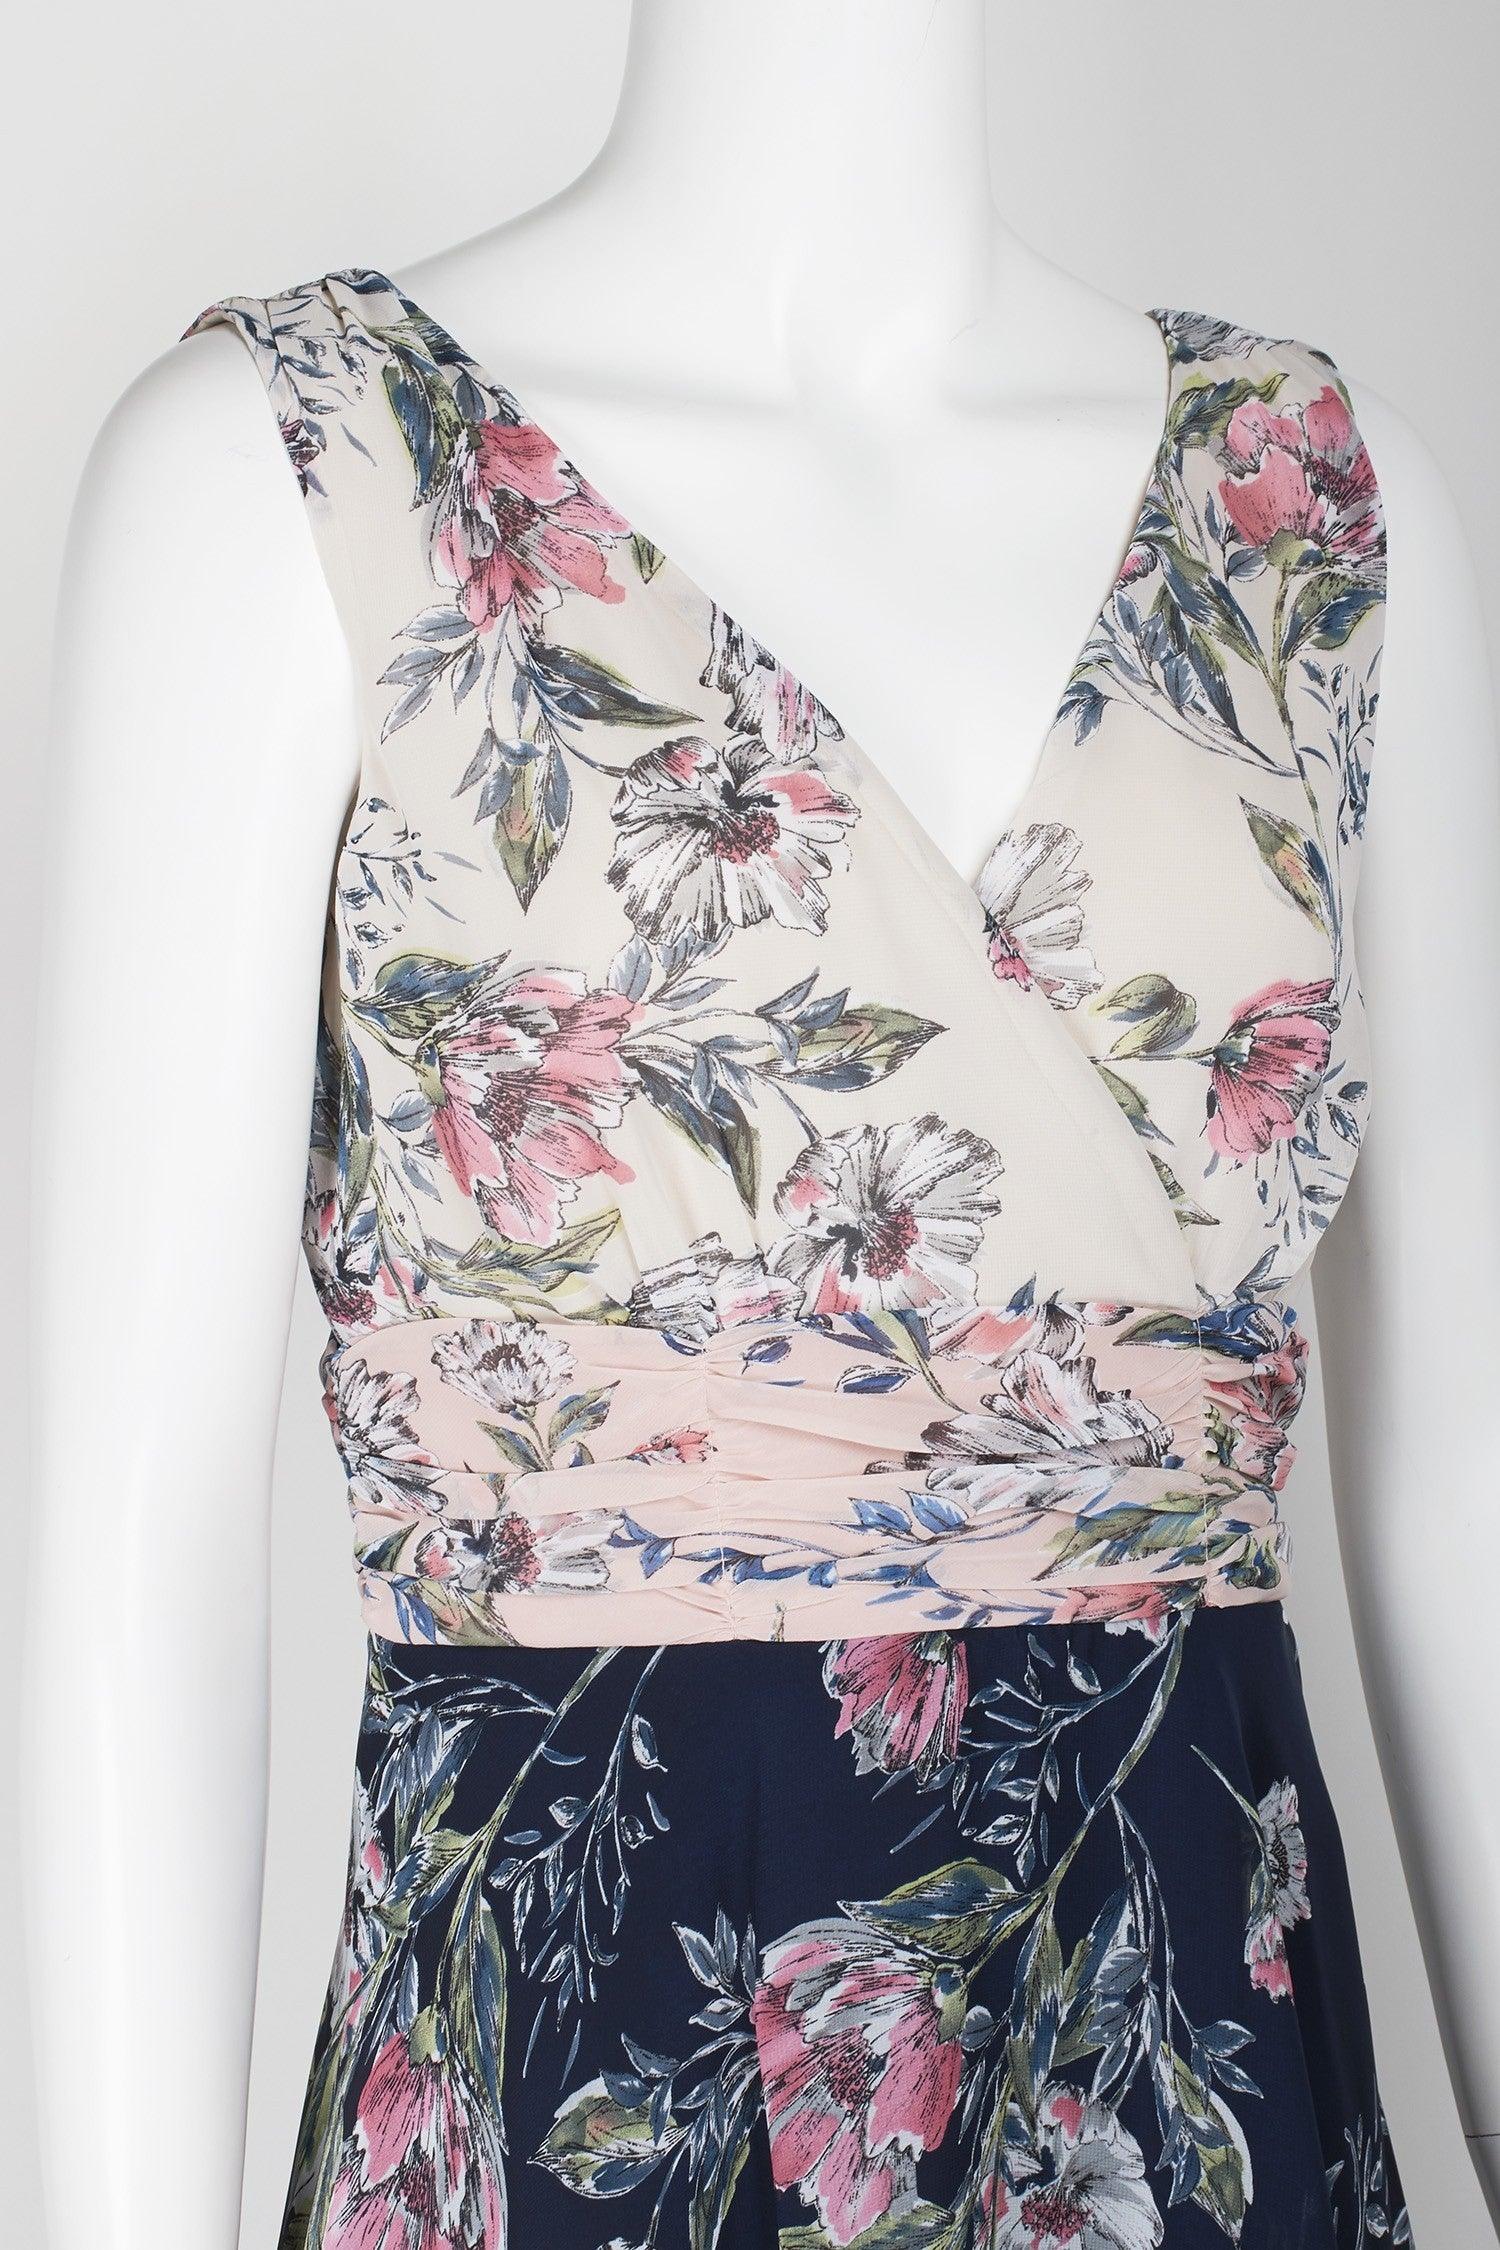 Connected Apparel Floral Print Chiffon Short Dress - The Dress Outlet